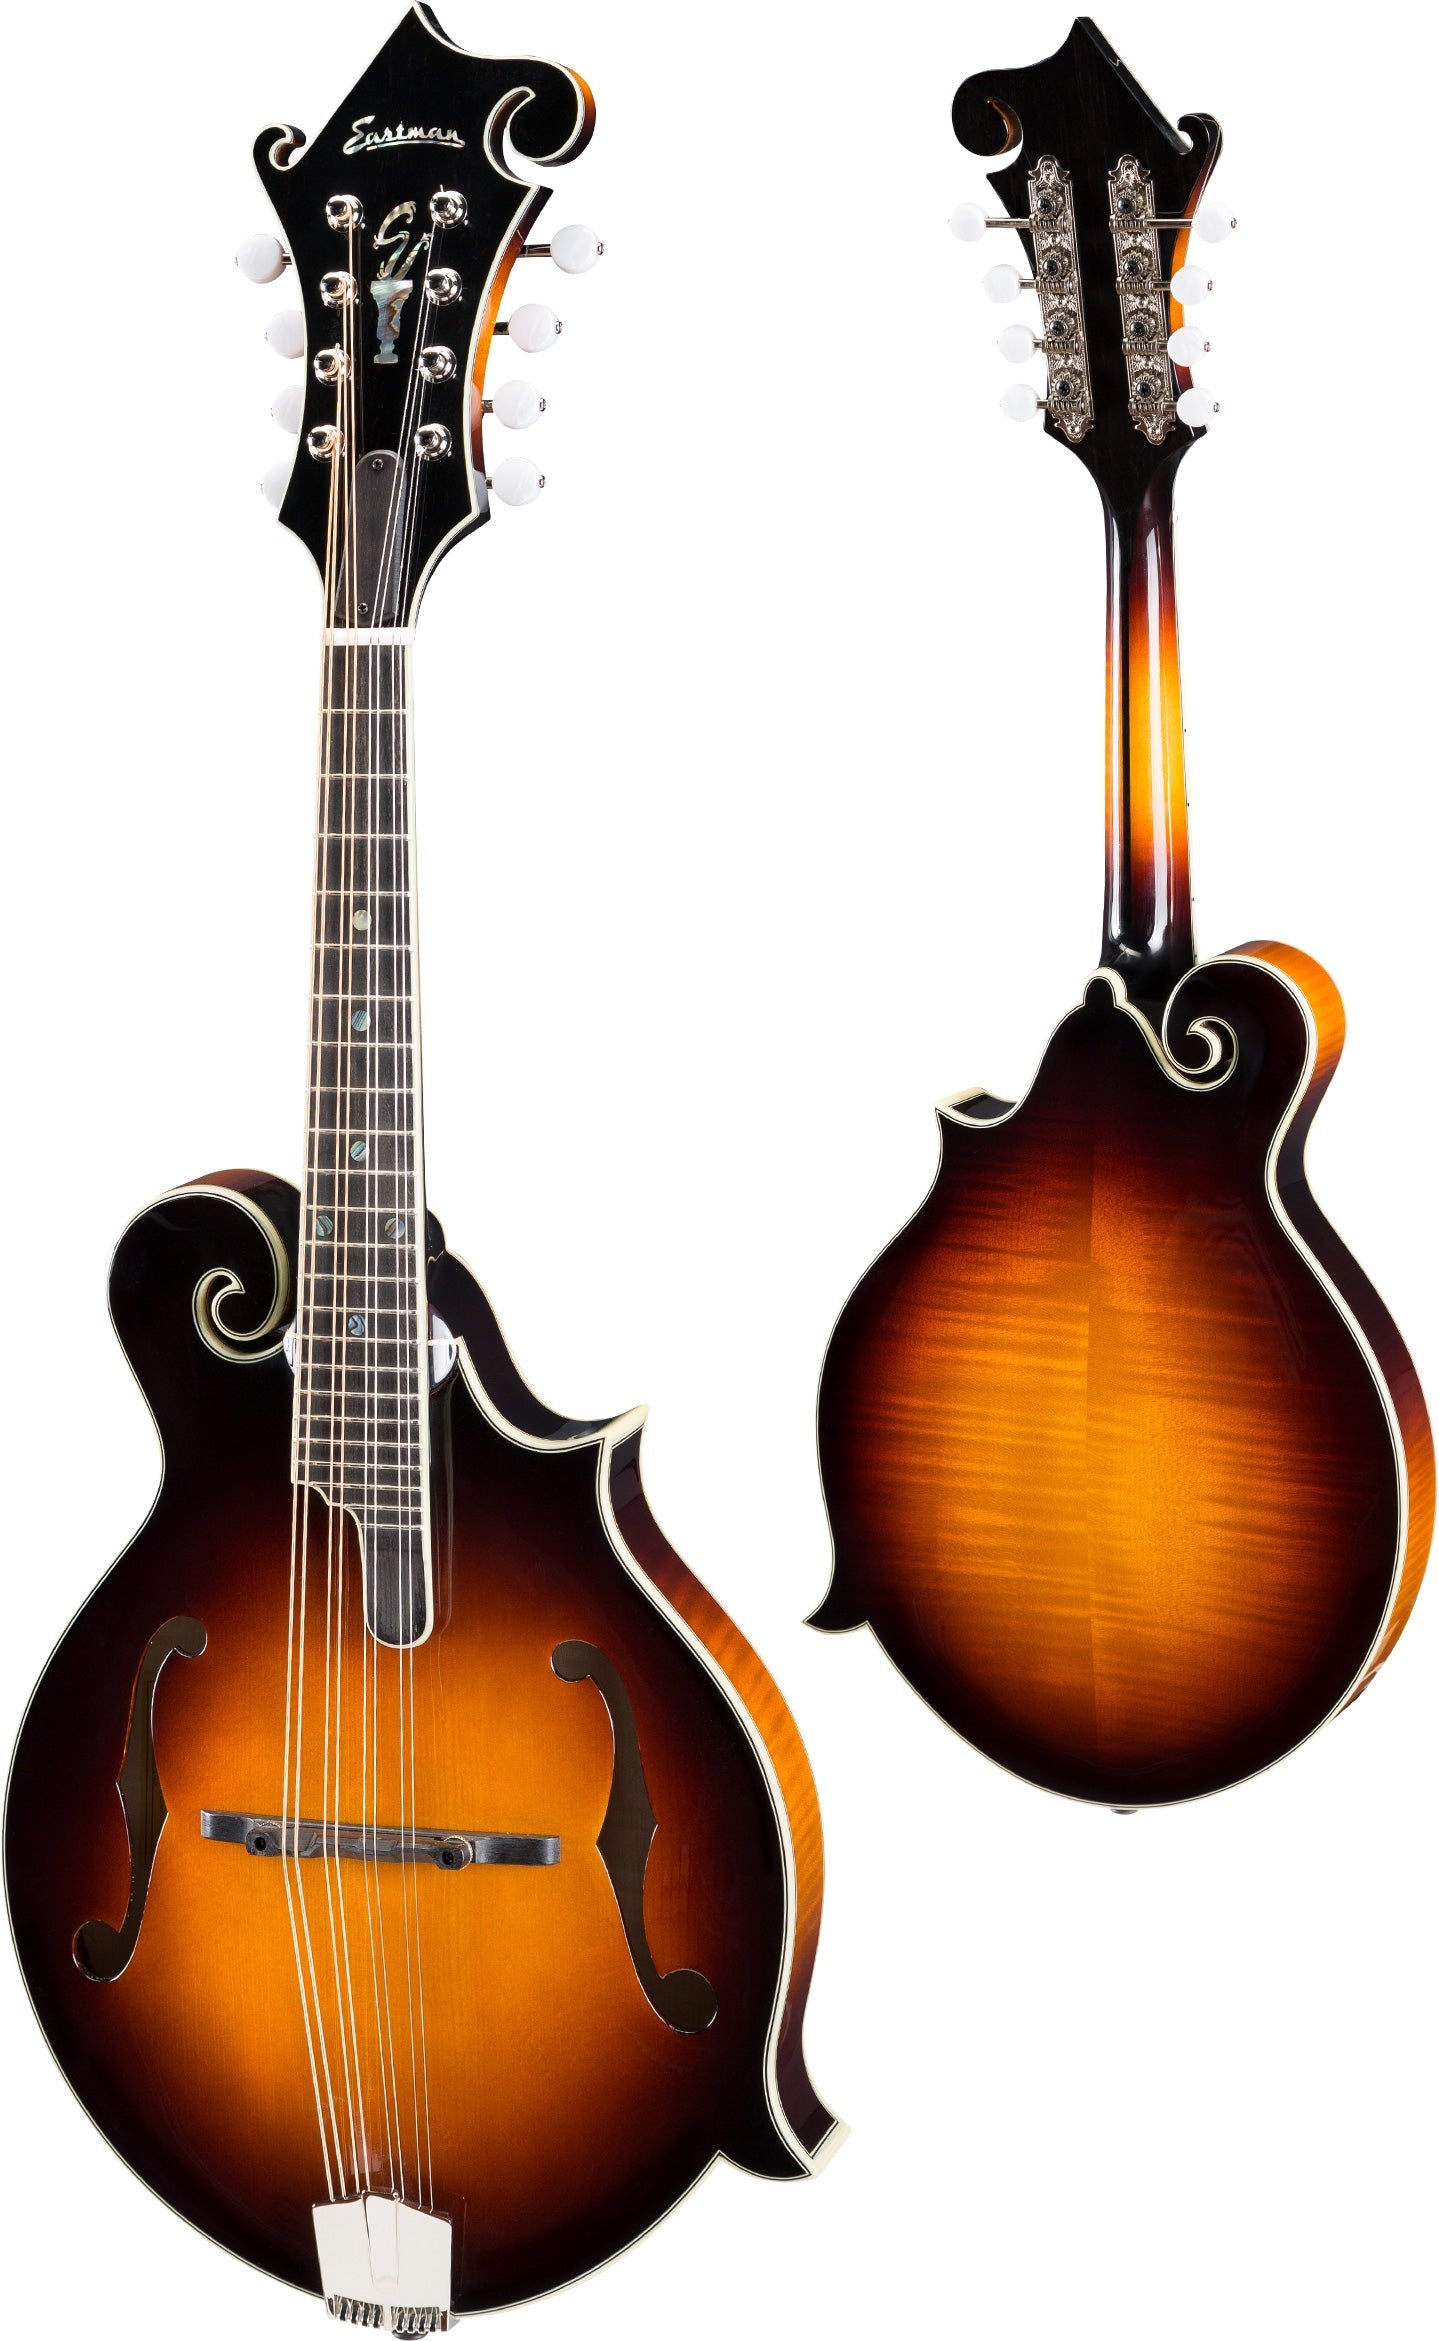 Eastman MD815 F-style F-holes Sunburst Mandolin (Solid Adirondack Spruce top, Solid AAA Maple back and sides, w/Case), Mandolin for sale at Richards Guitars.